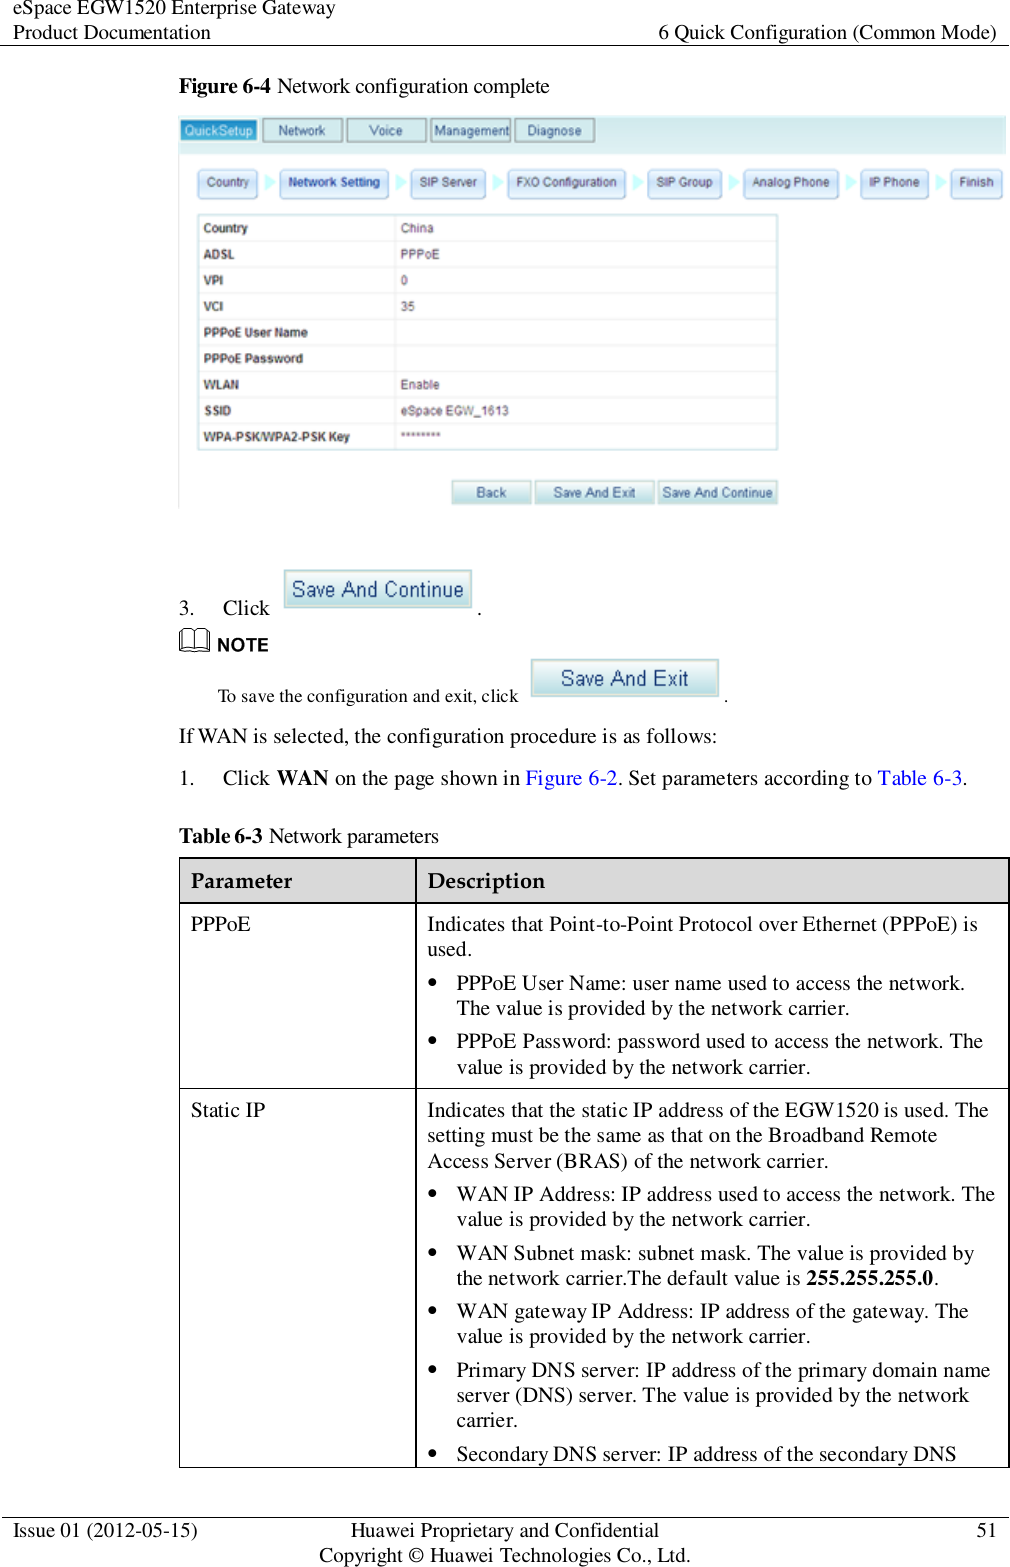 eSpace EGW1520 Enterprise Gateway Product Documentation 6 Quick Configuration (Common Mode)  Issue 01 (2012-05-15) Huawei Proprietary and Confidential                                     Copyright © Huawei Technologies Co., Ltd. 51  Figure 6-4 Network configuration complete   3. Click  .  To save the configuration and exit, click  . If WAN is selected, the configuration procedure is as follows: 1. Click WAN on the page shown in Figure 6-2. Set parameters according to Table 6-3. Table 6-3 Network parameters Parameter Description PPPoE Indicates that Point-to-Point Protocol over Ethernet (PPPoE) is used.  PPPoE User Name: user name used to access the network. The value is provided by the network carrier.  PPPoE Password: password used to access the network. The value is provided by the network carrier. Static IP Indicates that the static IP address of the EGW1520 is used. The setting must be the same as that on the Broadband Remote Access Server (BRAS) of the network carrier.  WAN IP Address: IP address used to access the network. The value is provided by the network carrier.  WAN Subnet mask: subnet mask. The value is provided by the network carrier.The default value is 255.255.255.0.  WAN gateway IP Address: IP address of the gateway. The value is provided by the network carrier.  Primary DNS server: IP address of the primary domain name server (DNS) server. The value is provided by the network carrier.  Secondary DNS server: IP address of the secondary DNS 